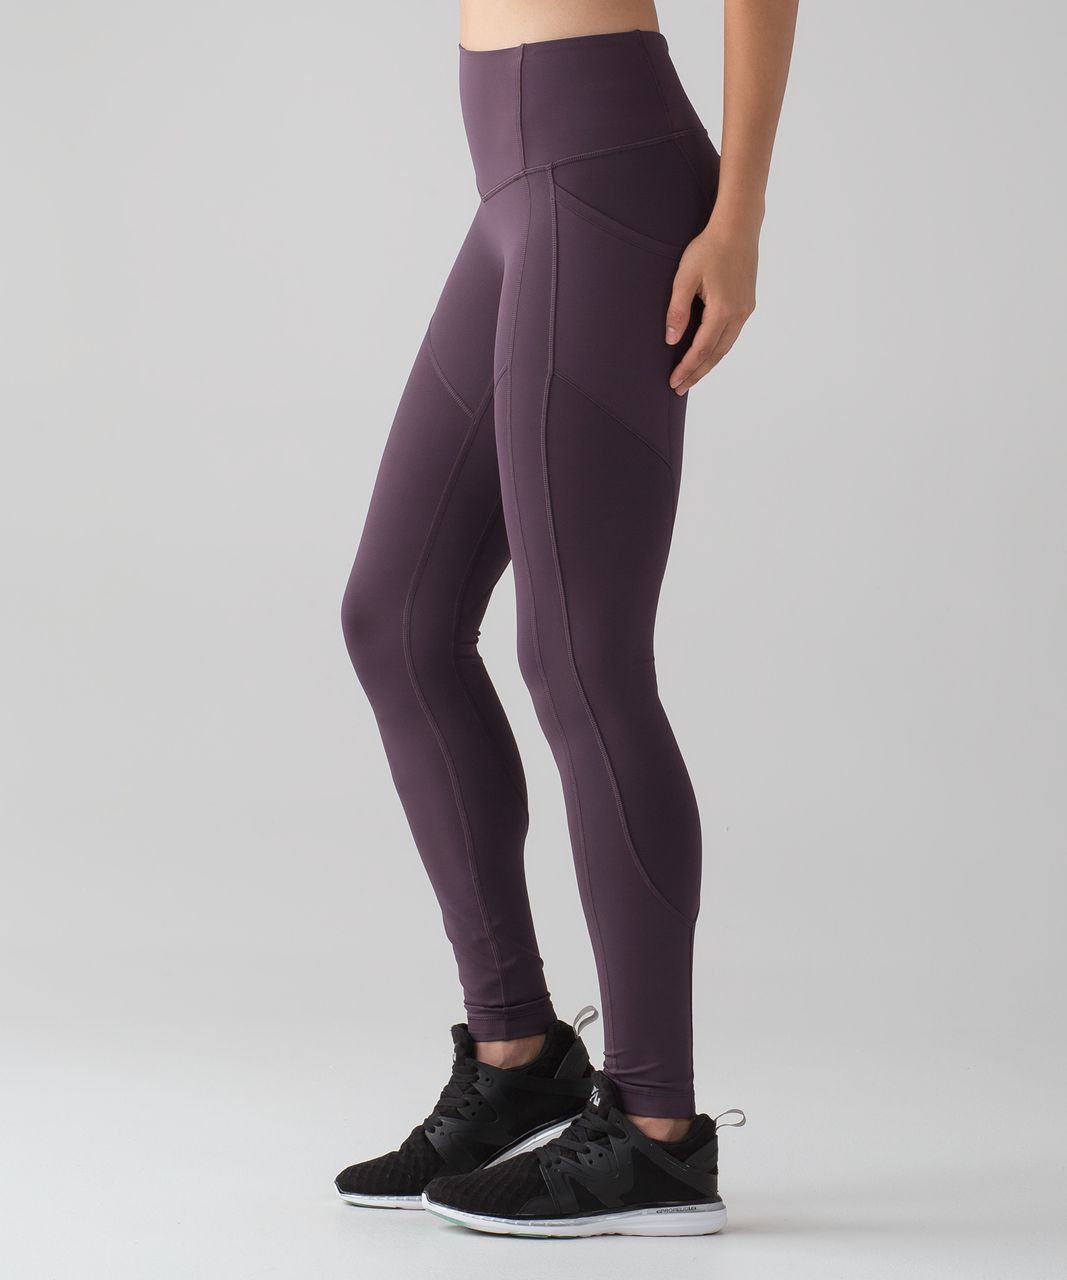 all the right places pant, women's pants